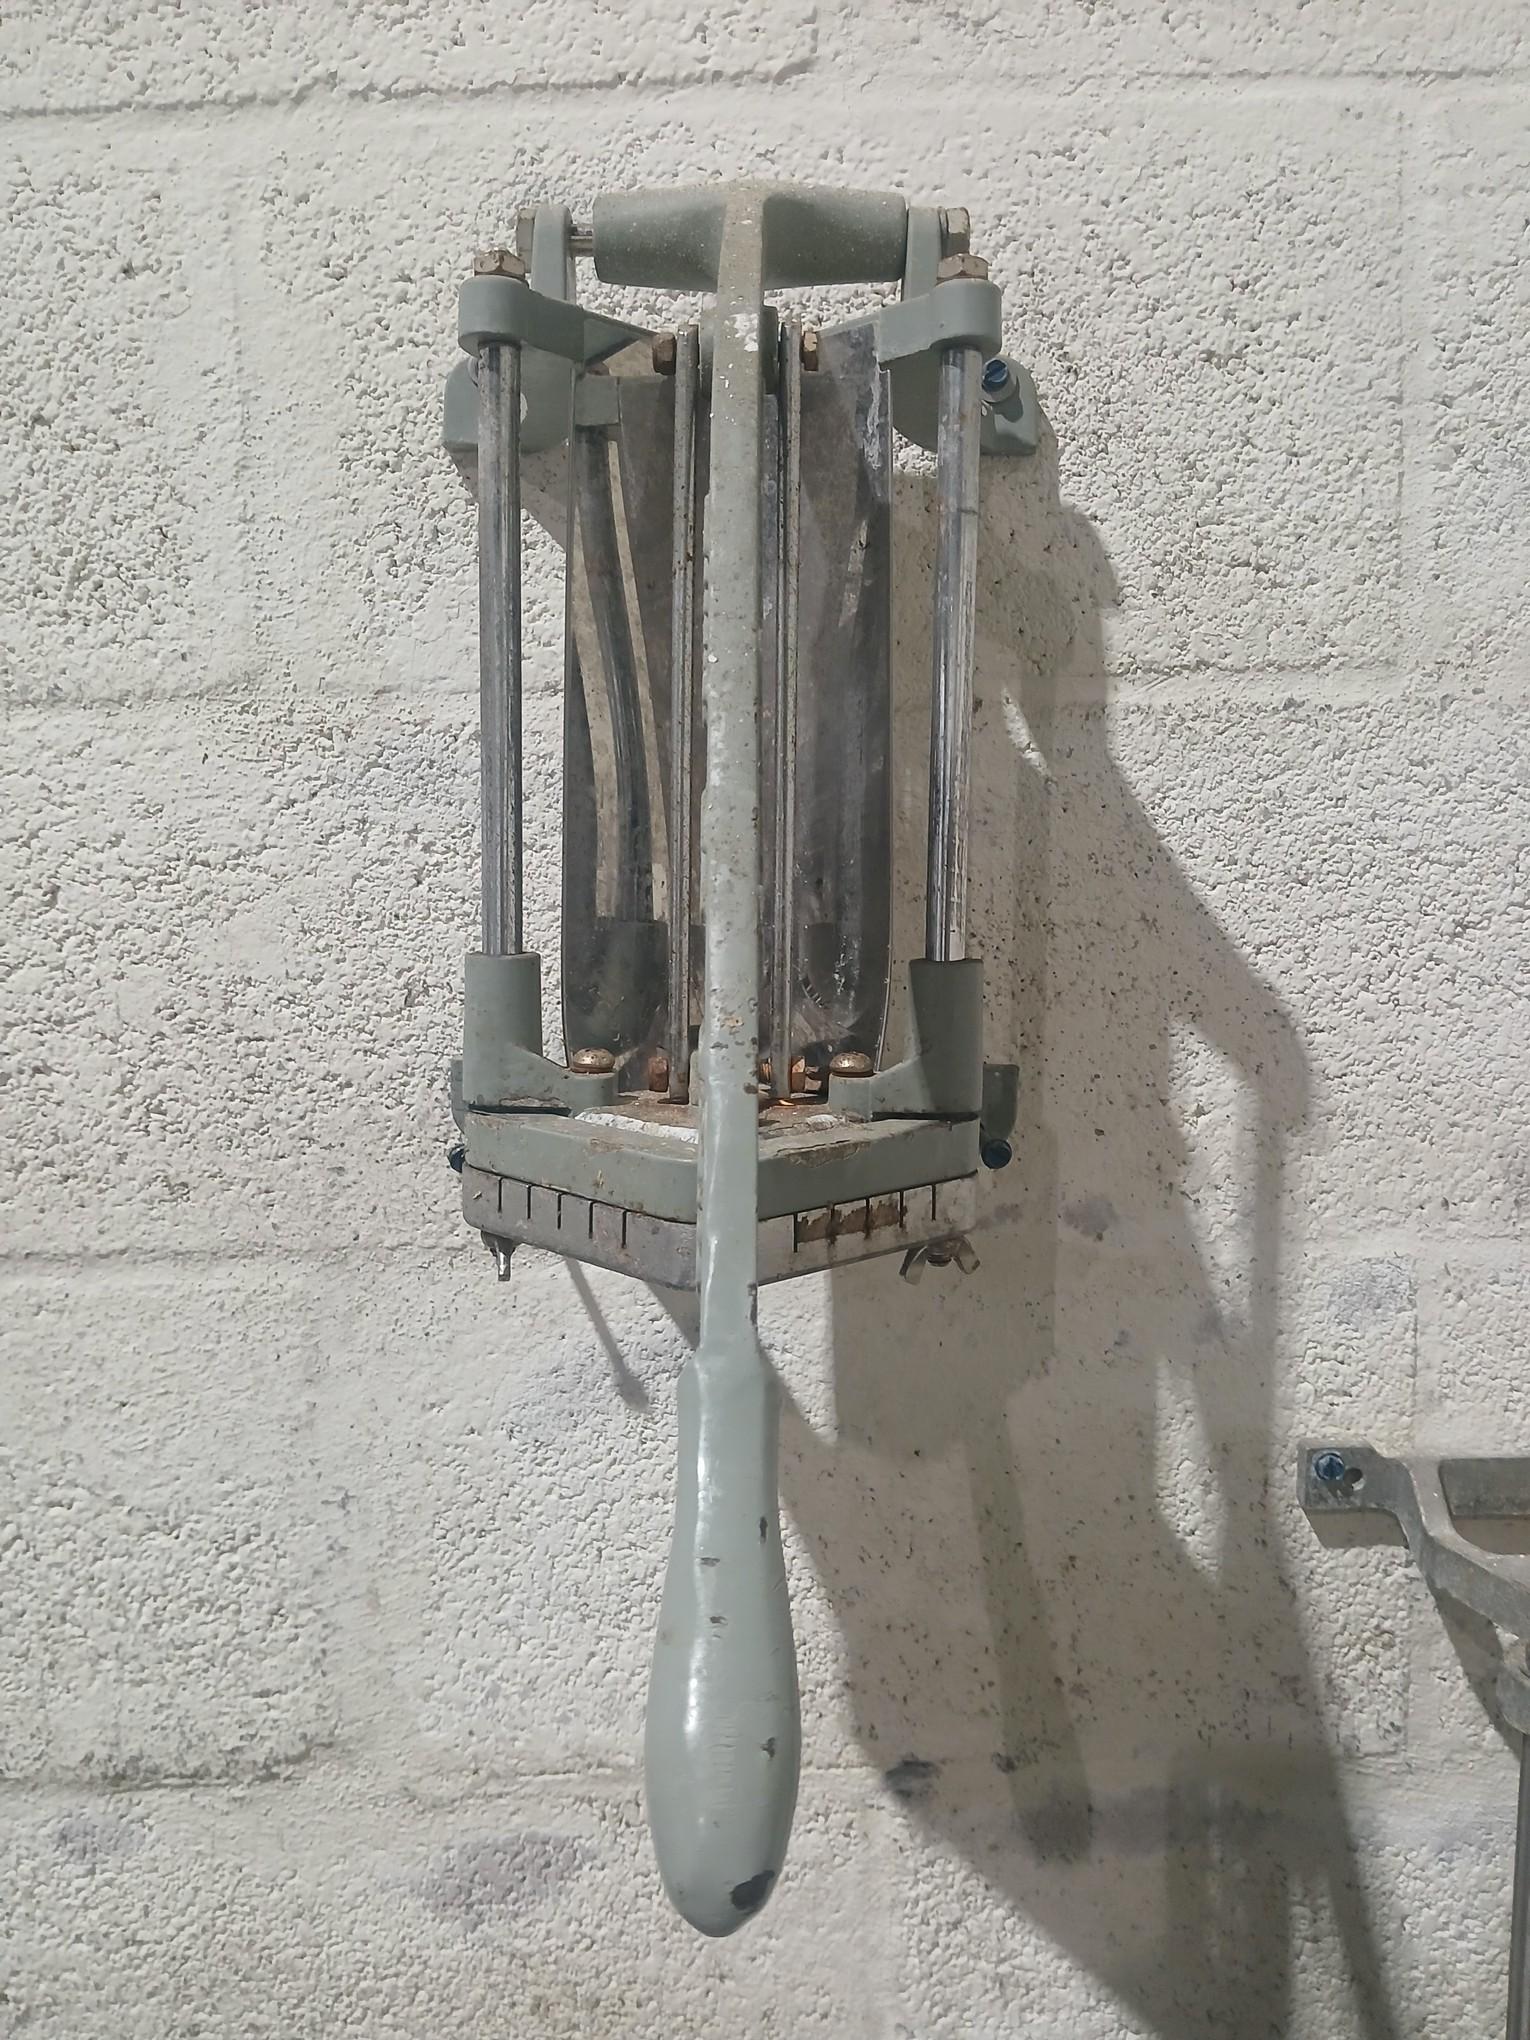 Table Mount Potatoe Slicer / Food Slicer Chopper - Please see pics for additional specs.